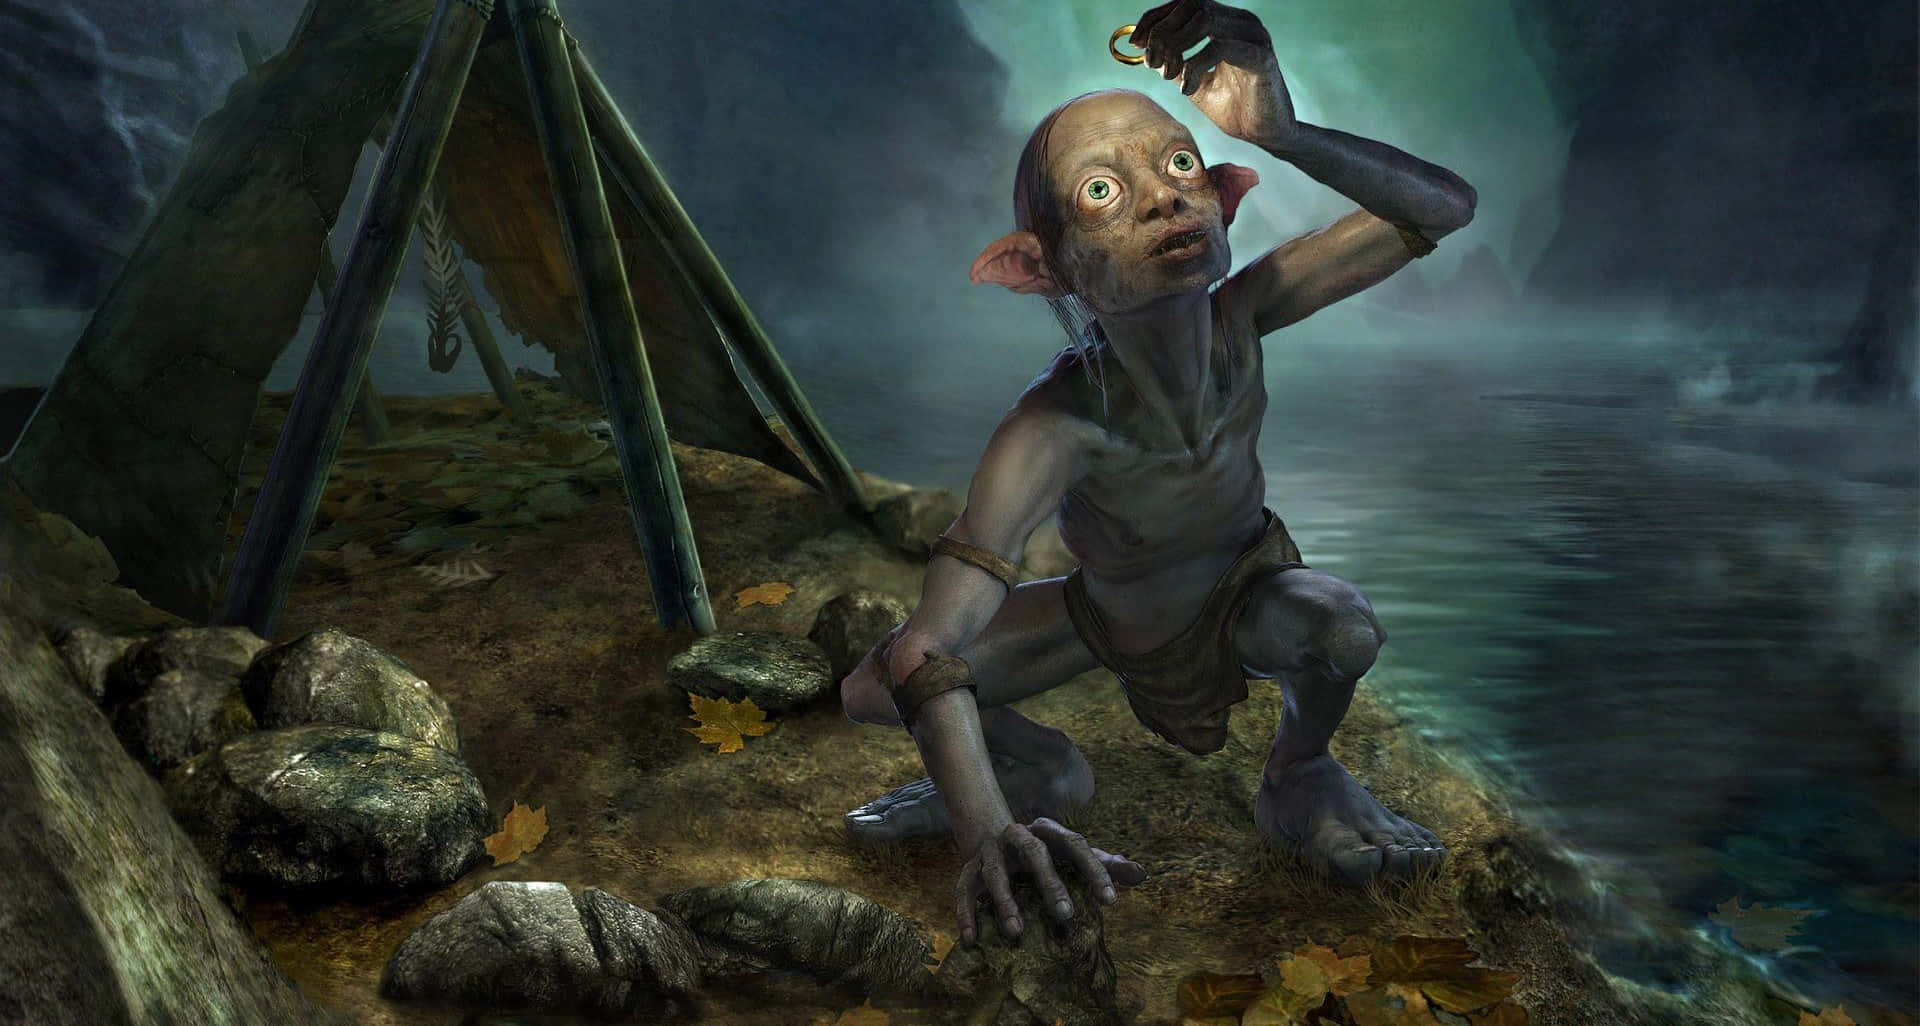 Gollum, an iconic character in the Lord of the Rings series